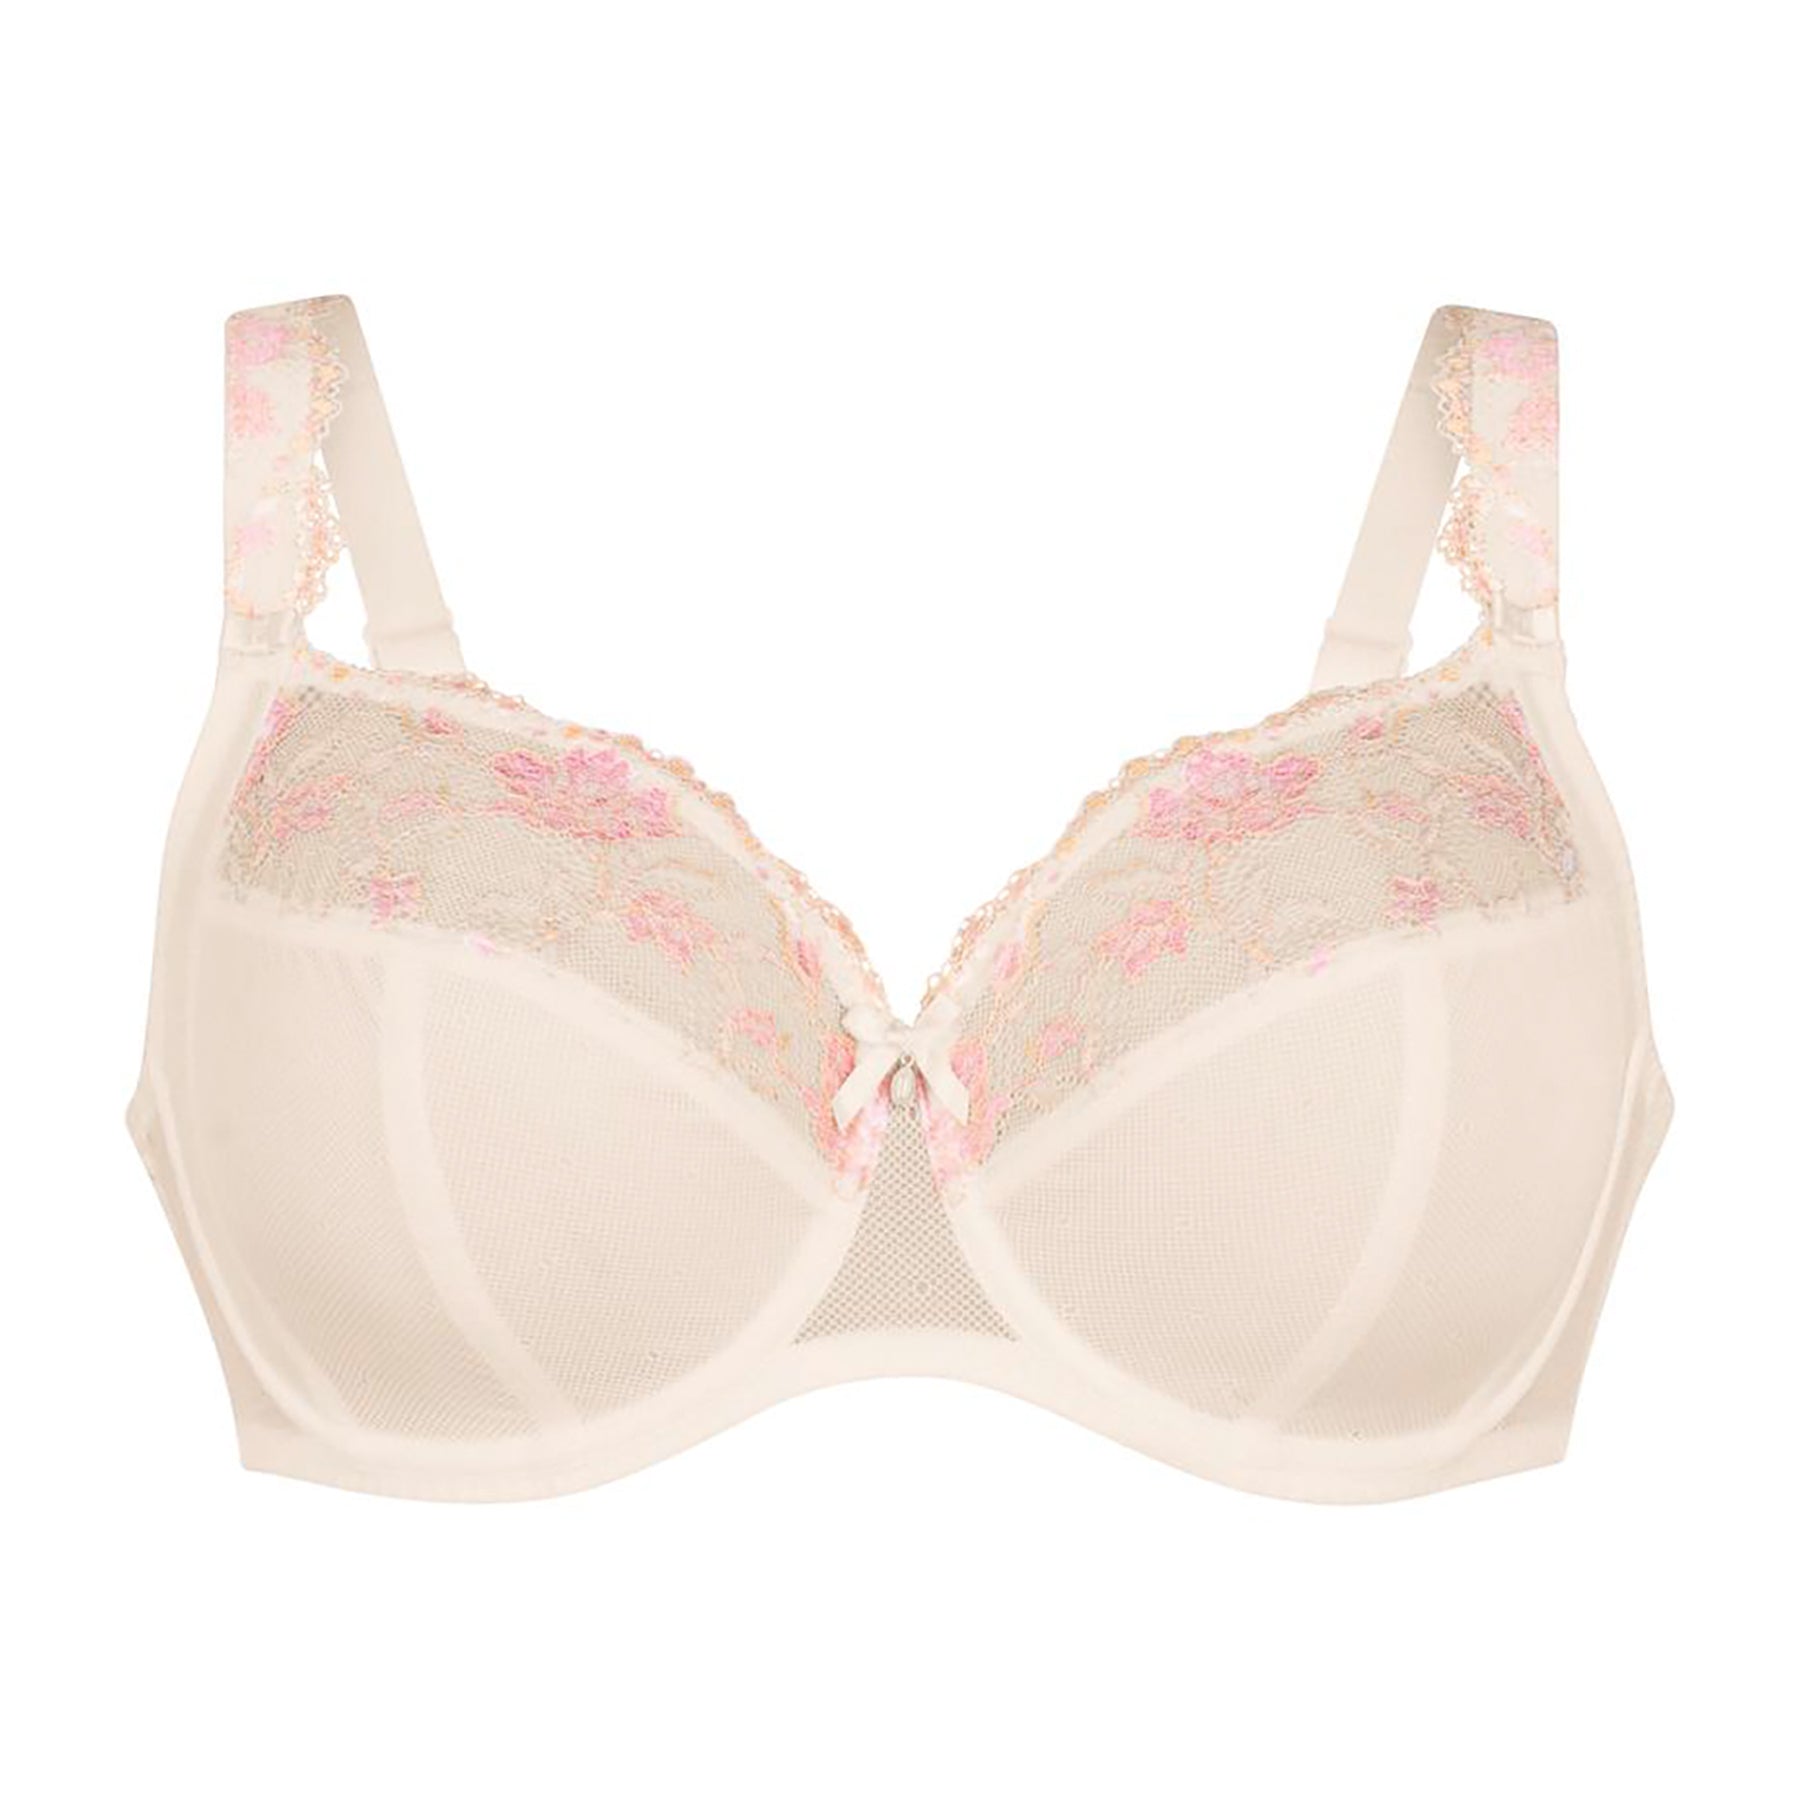 Shop Top Lingerie Brands from Linea Intima